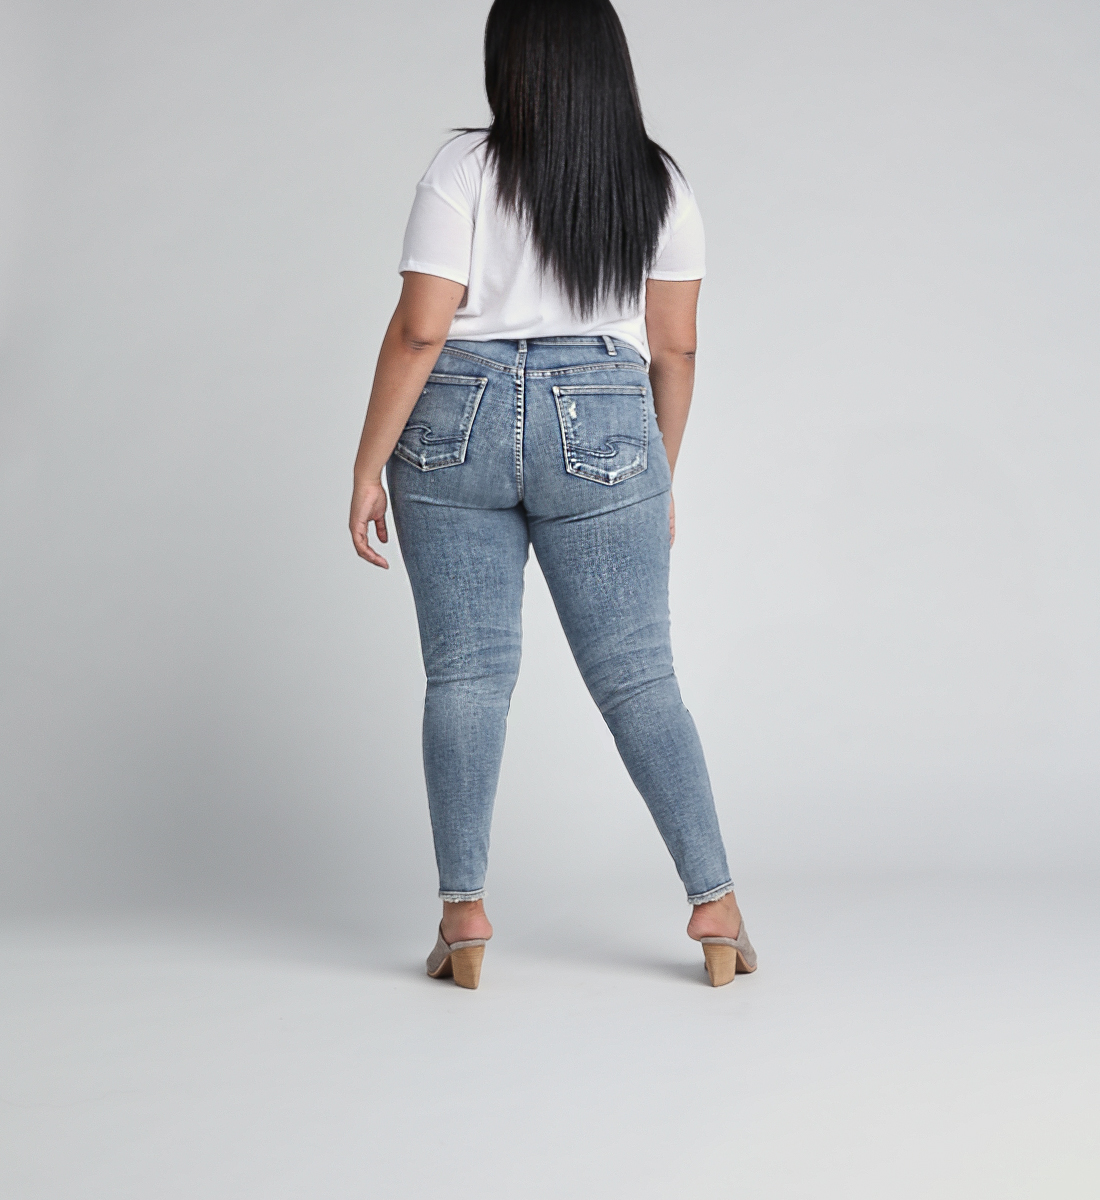 Avery Skinny - Silver Jeans US